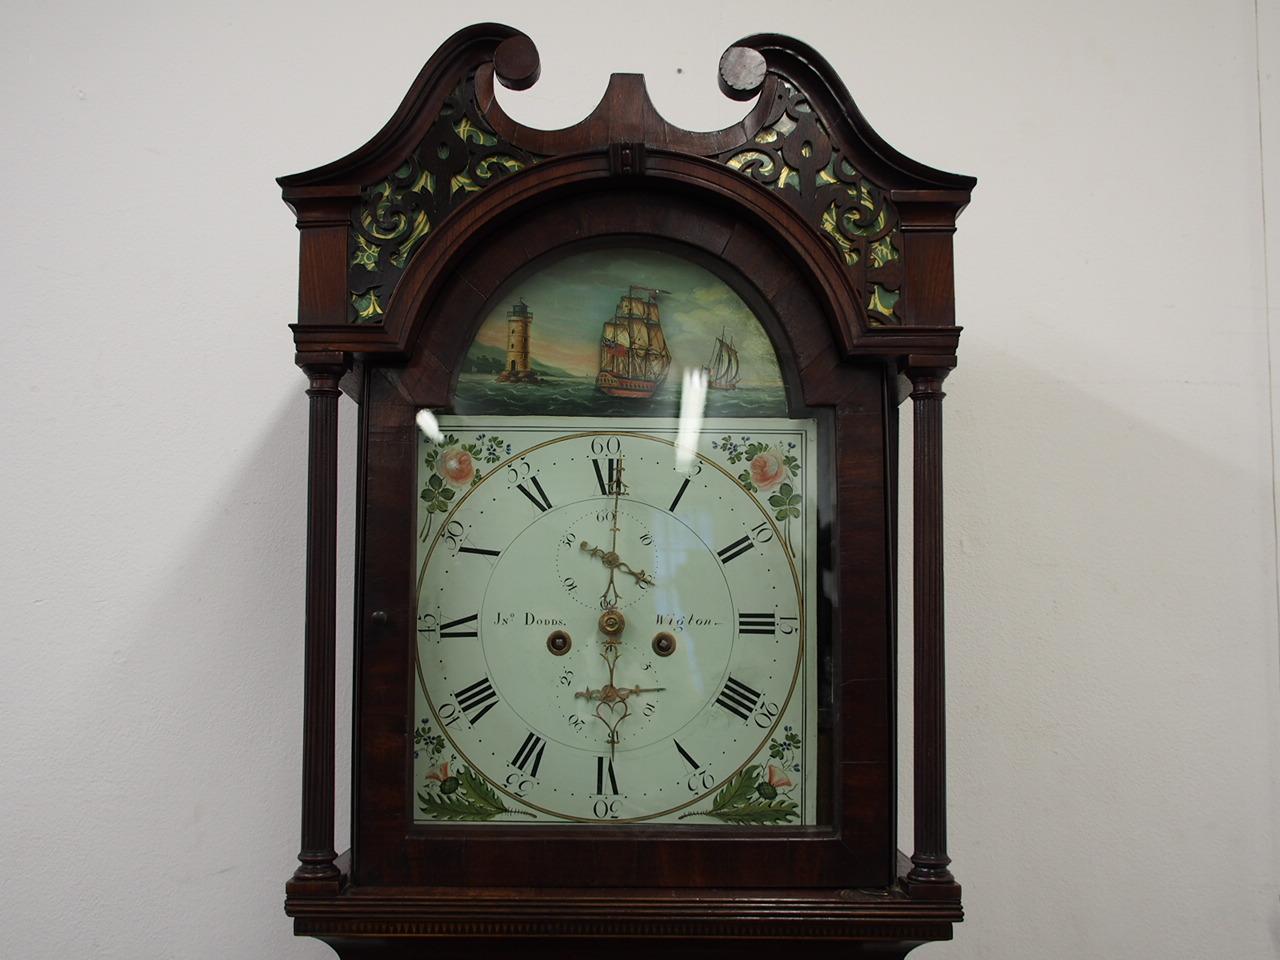 George IV mahogany and inlaid clock by J. John Dodds of Wigton, circa 1820. With painted face featuring a rocking ship mechanism and a nautical theme, a horn top and open fretwork panel. There are tapering columns to the case with inlaid shell